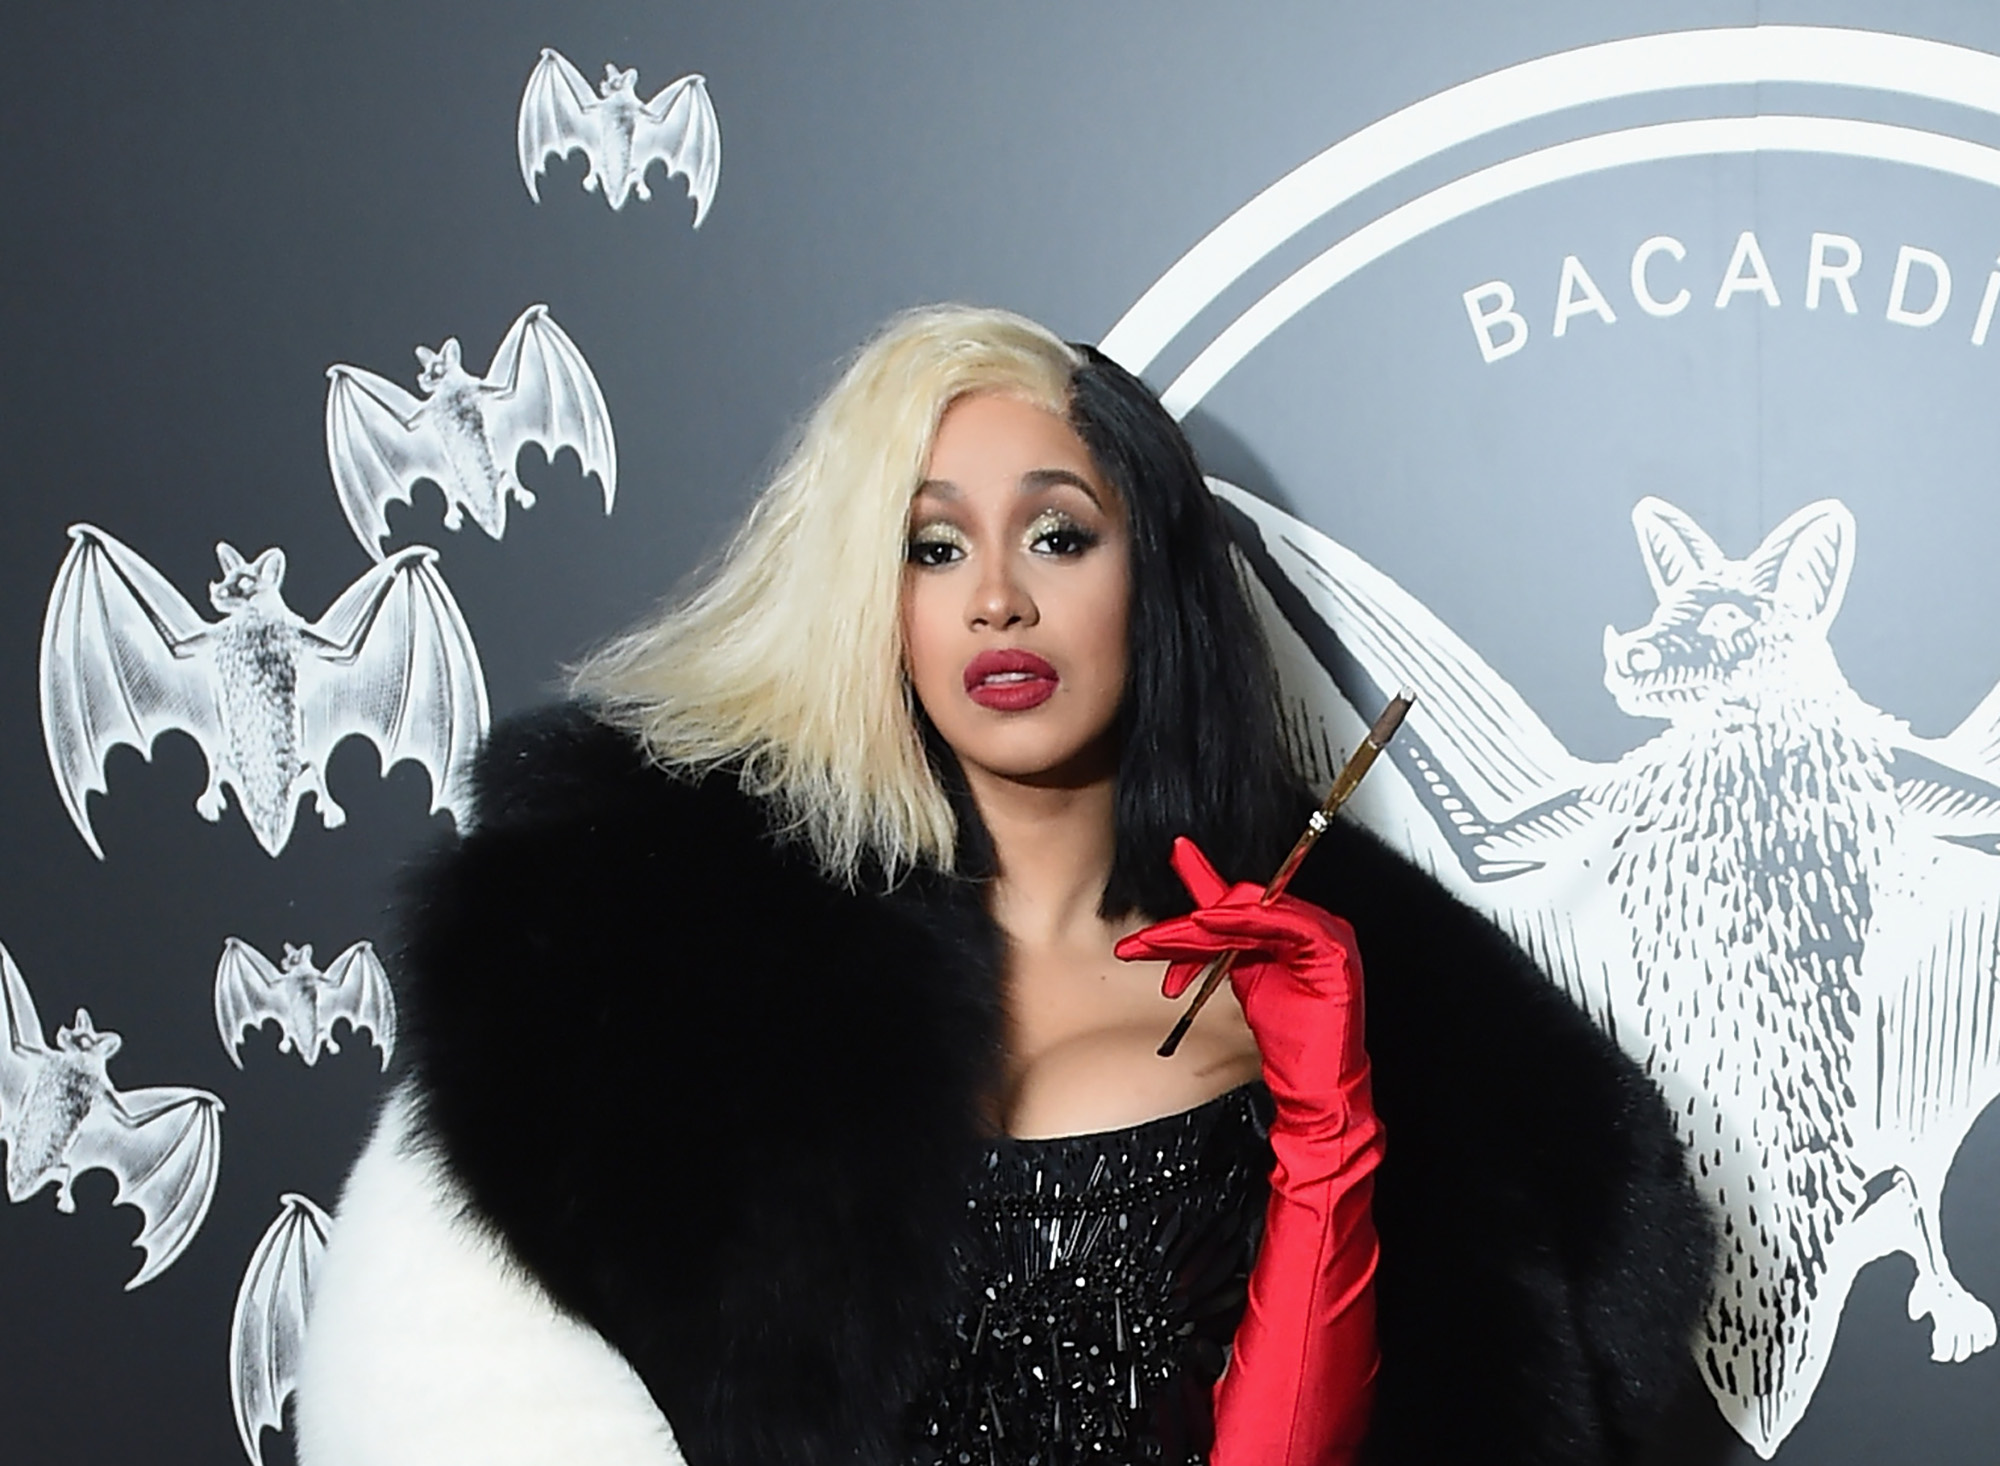 BACARDI Presents Dress To Be Free With Performances By Cardi B And Les Twins